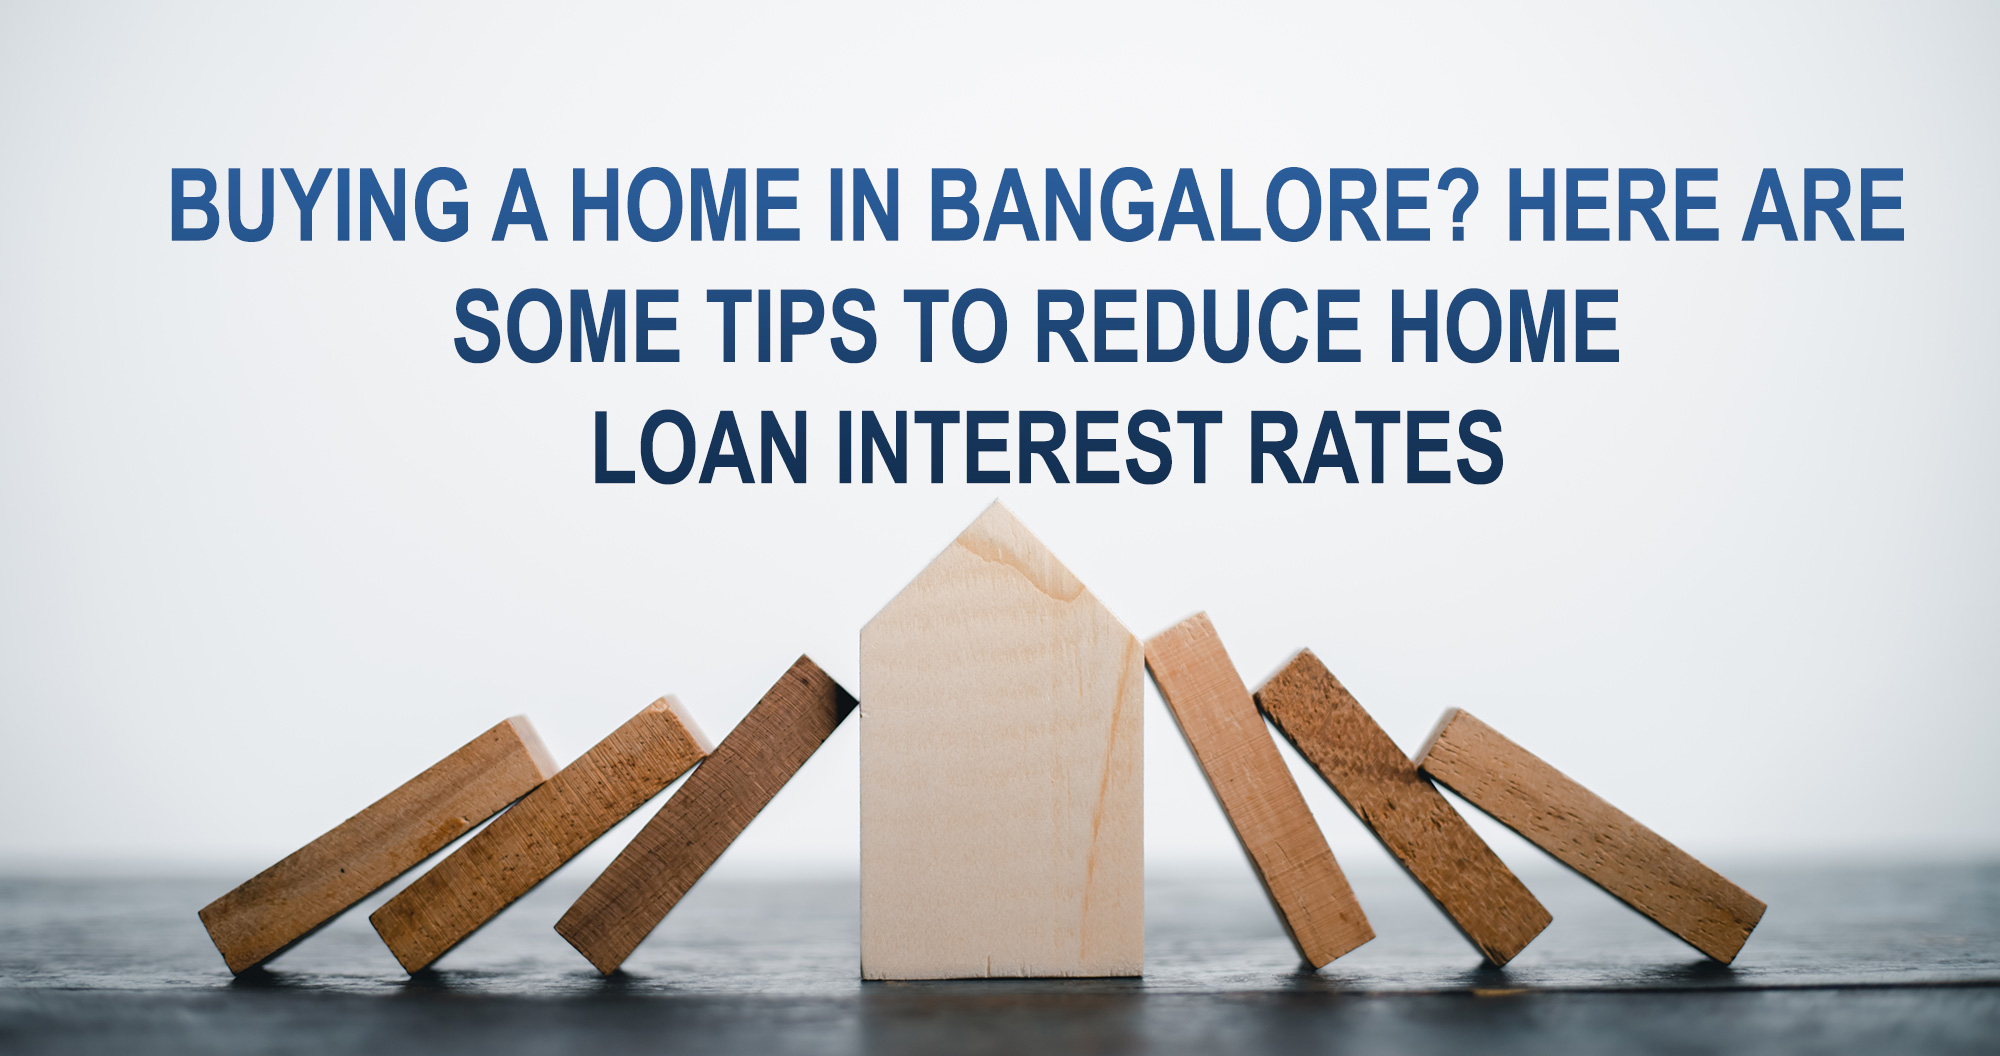 Buying a home in Bangalore? Here are some tips to reduce home loan interest rates